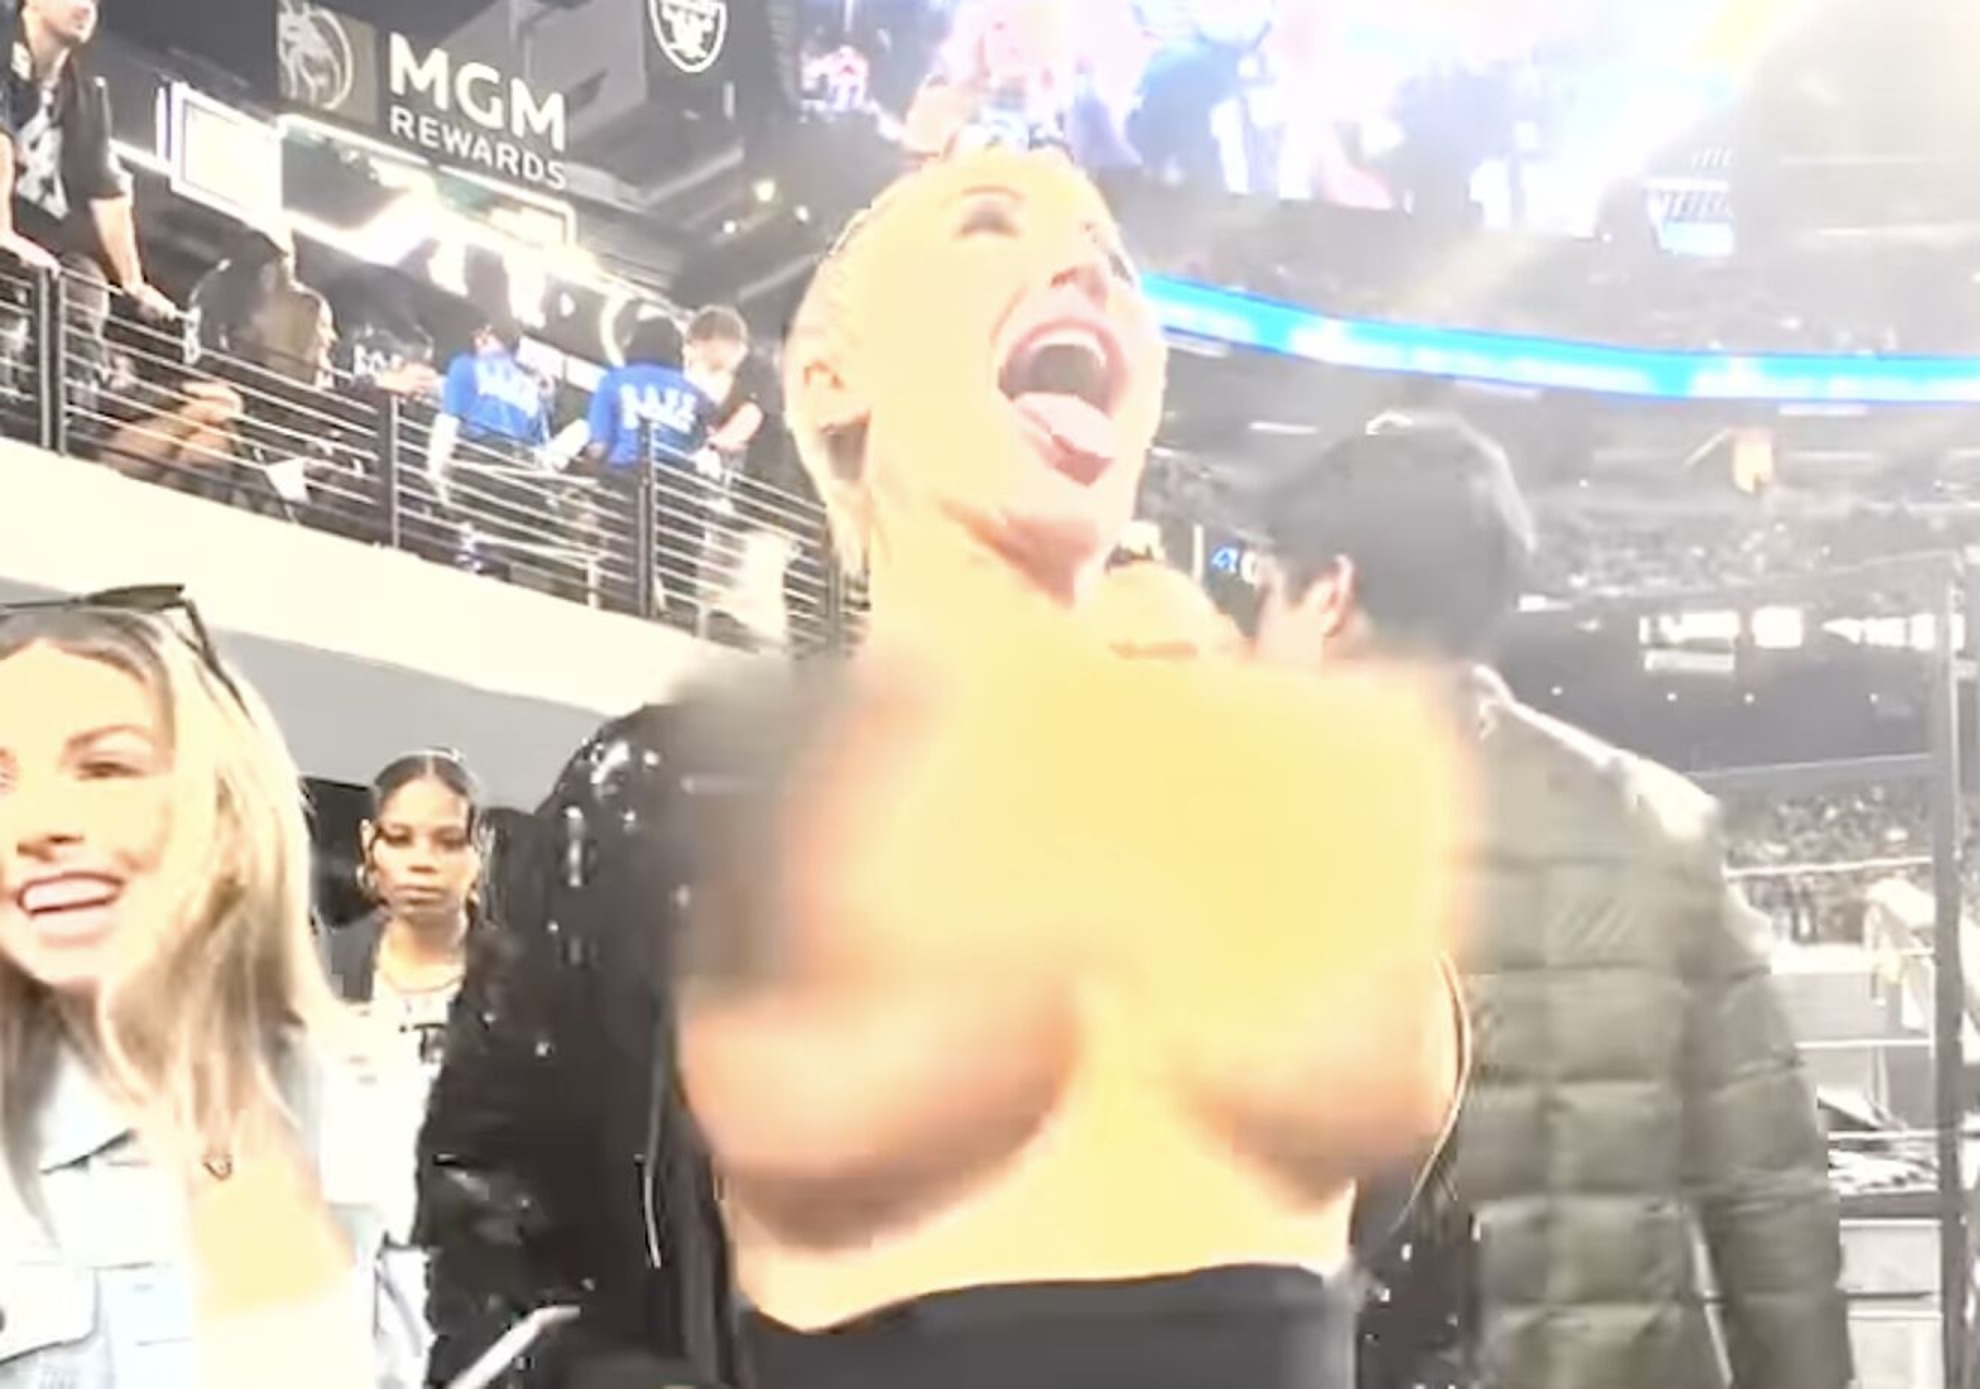 Danii Banks plays down controversy after showing her breasts at Raiders game and being ejected: The kids didn't see me